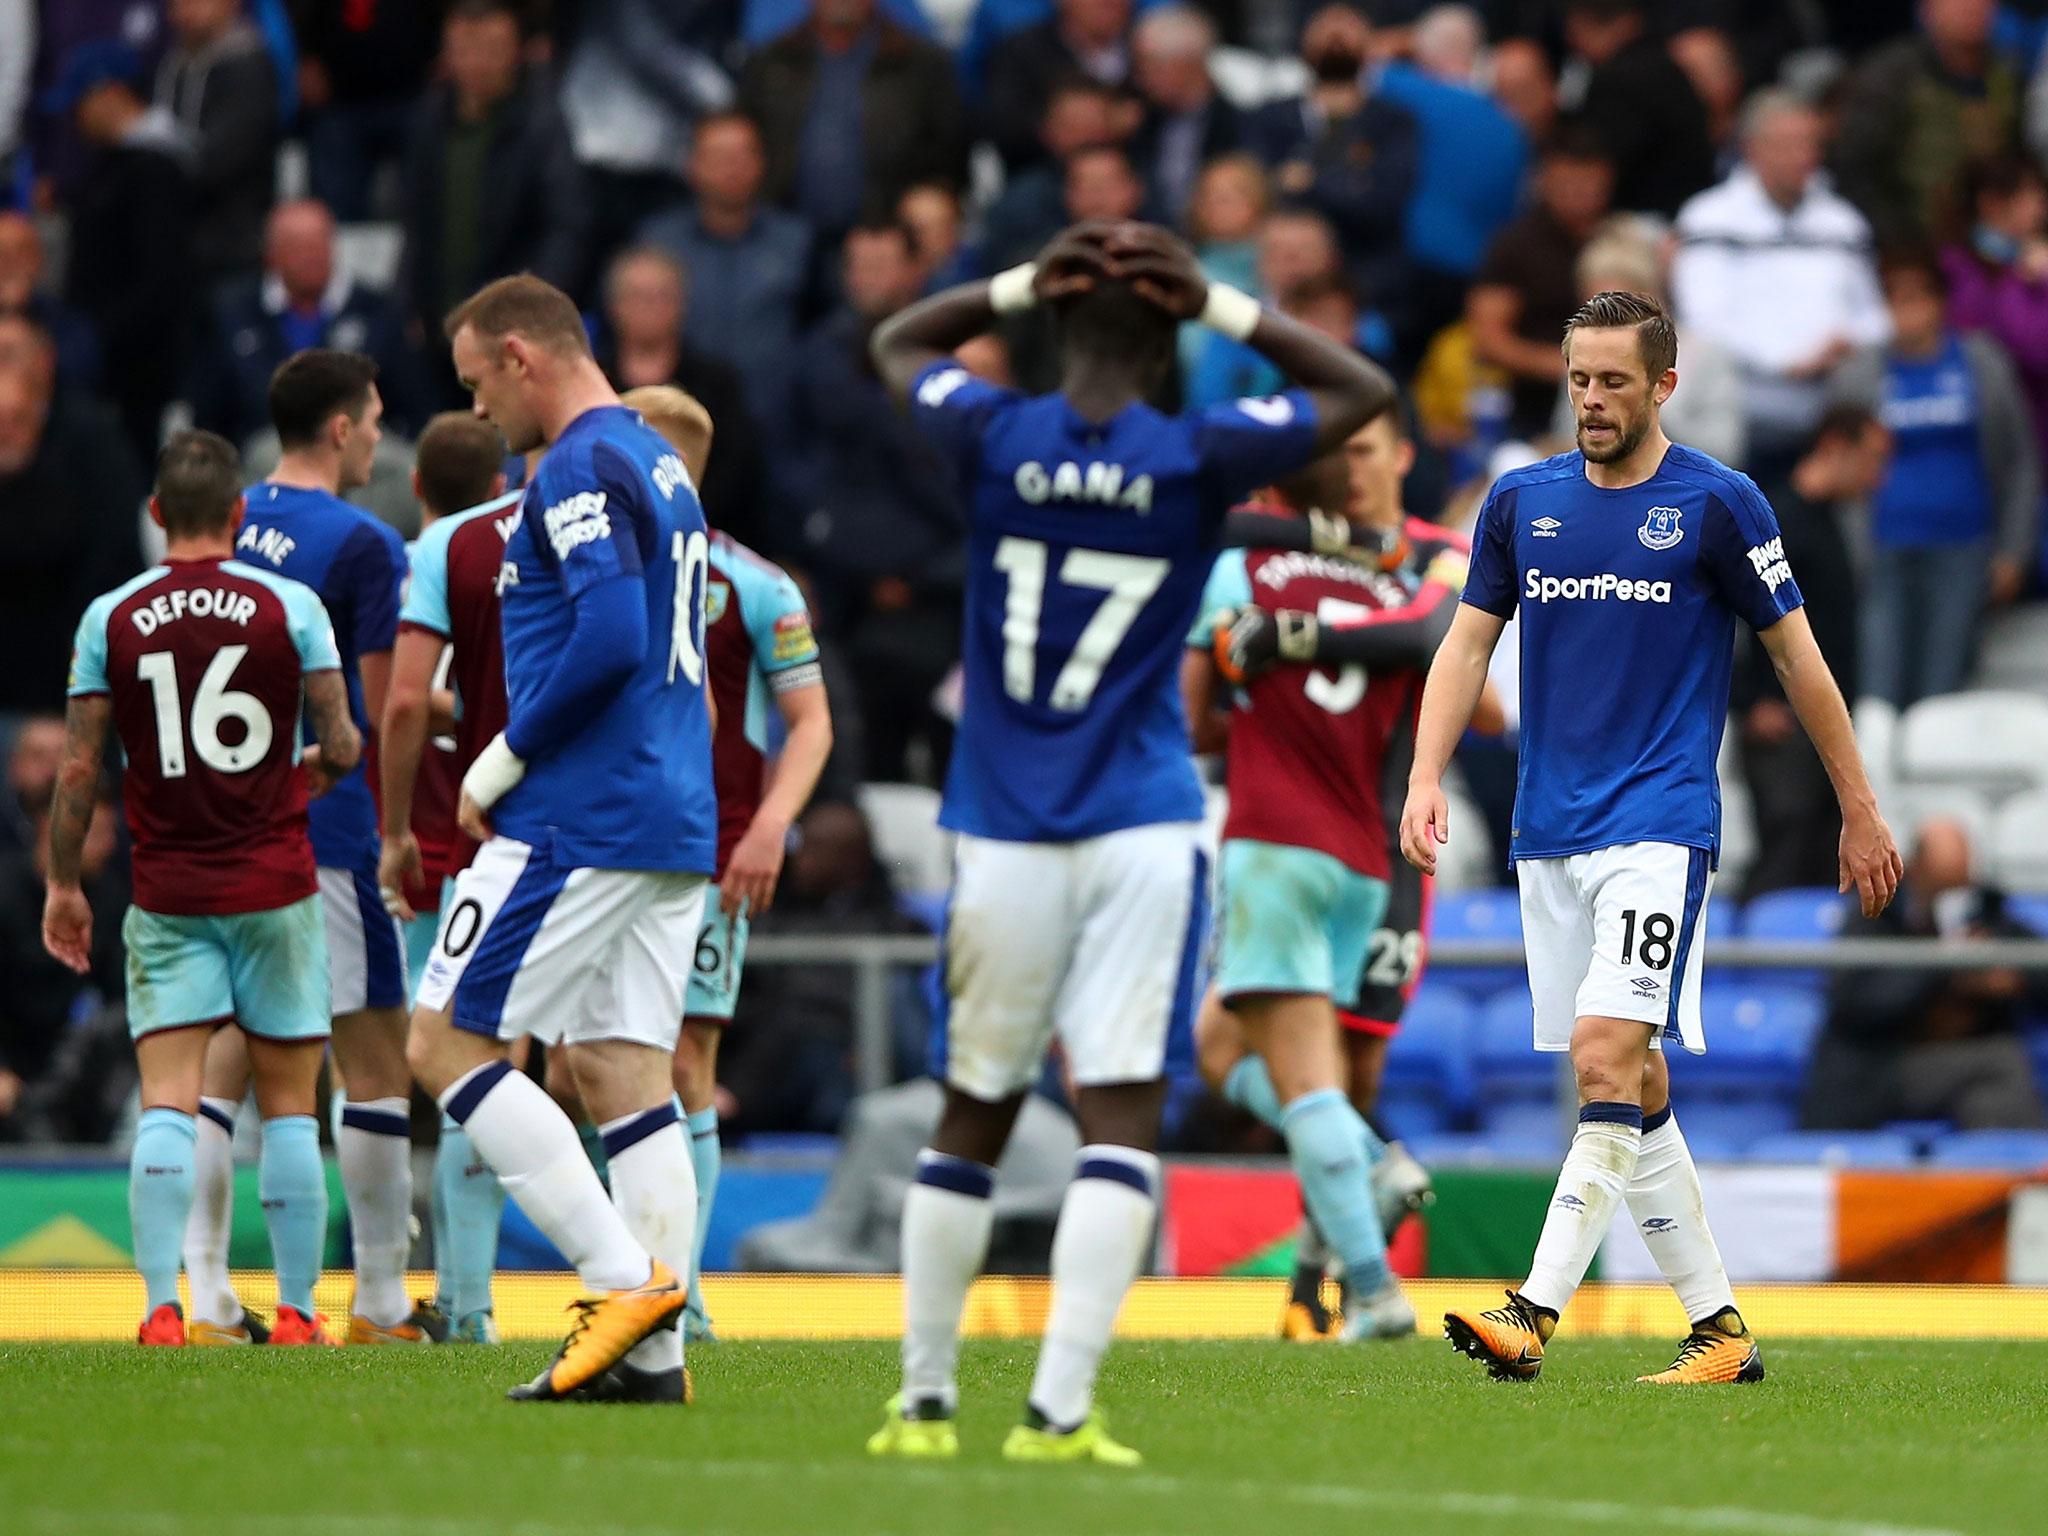 Everton's players look on after defeat by Burnley